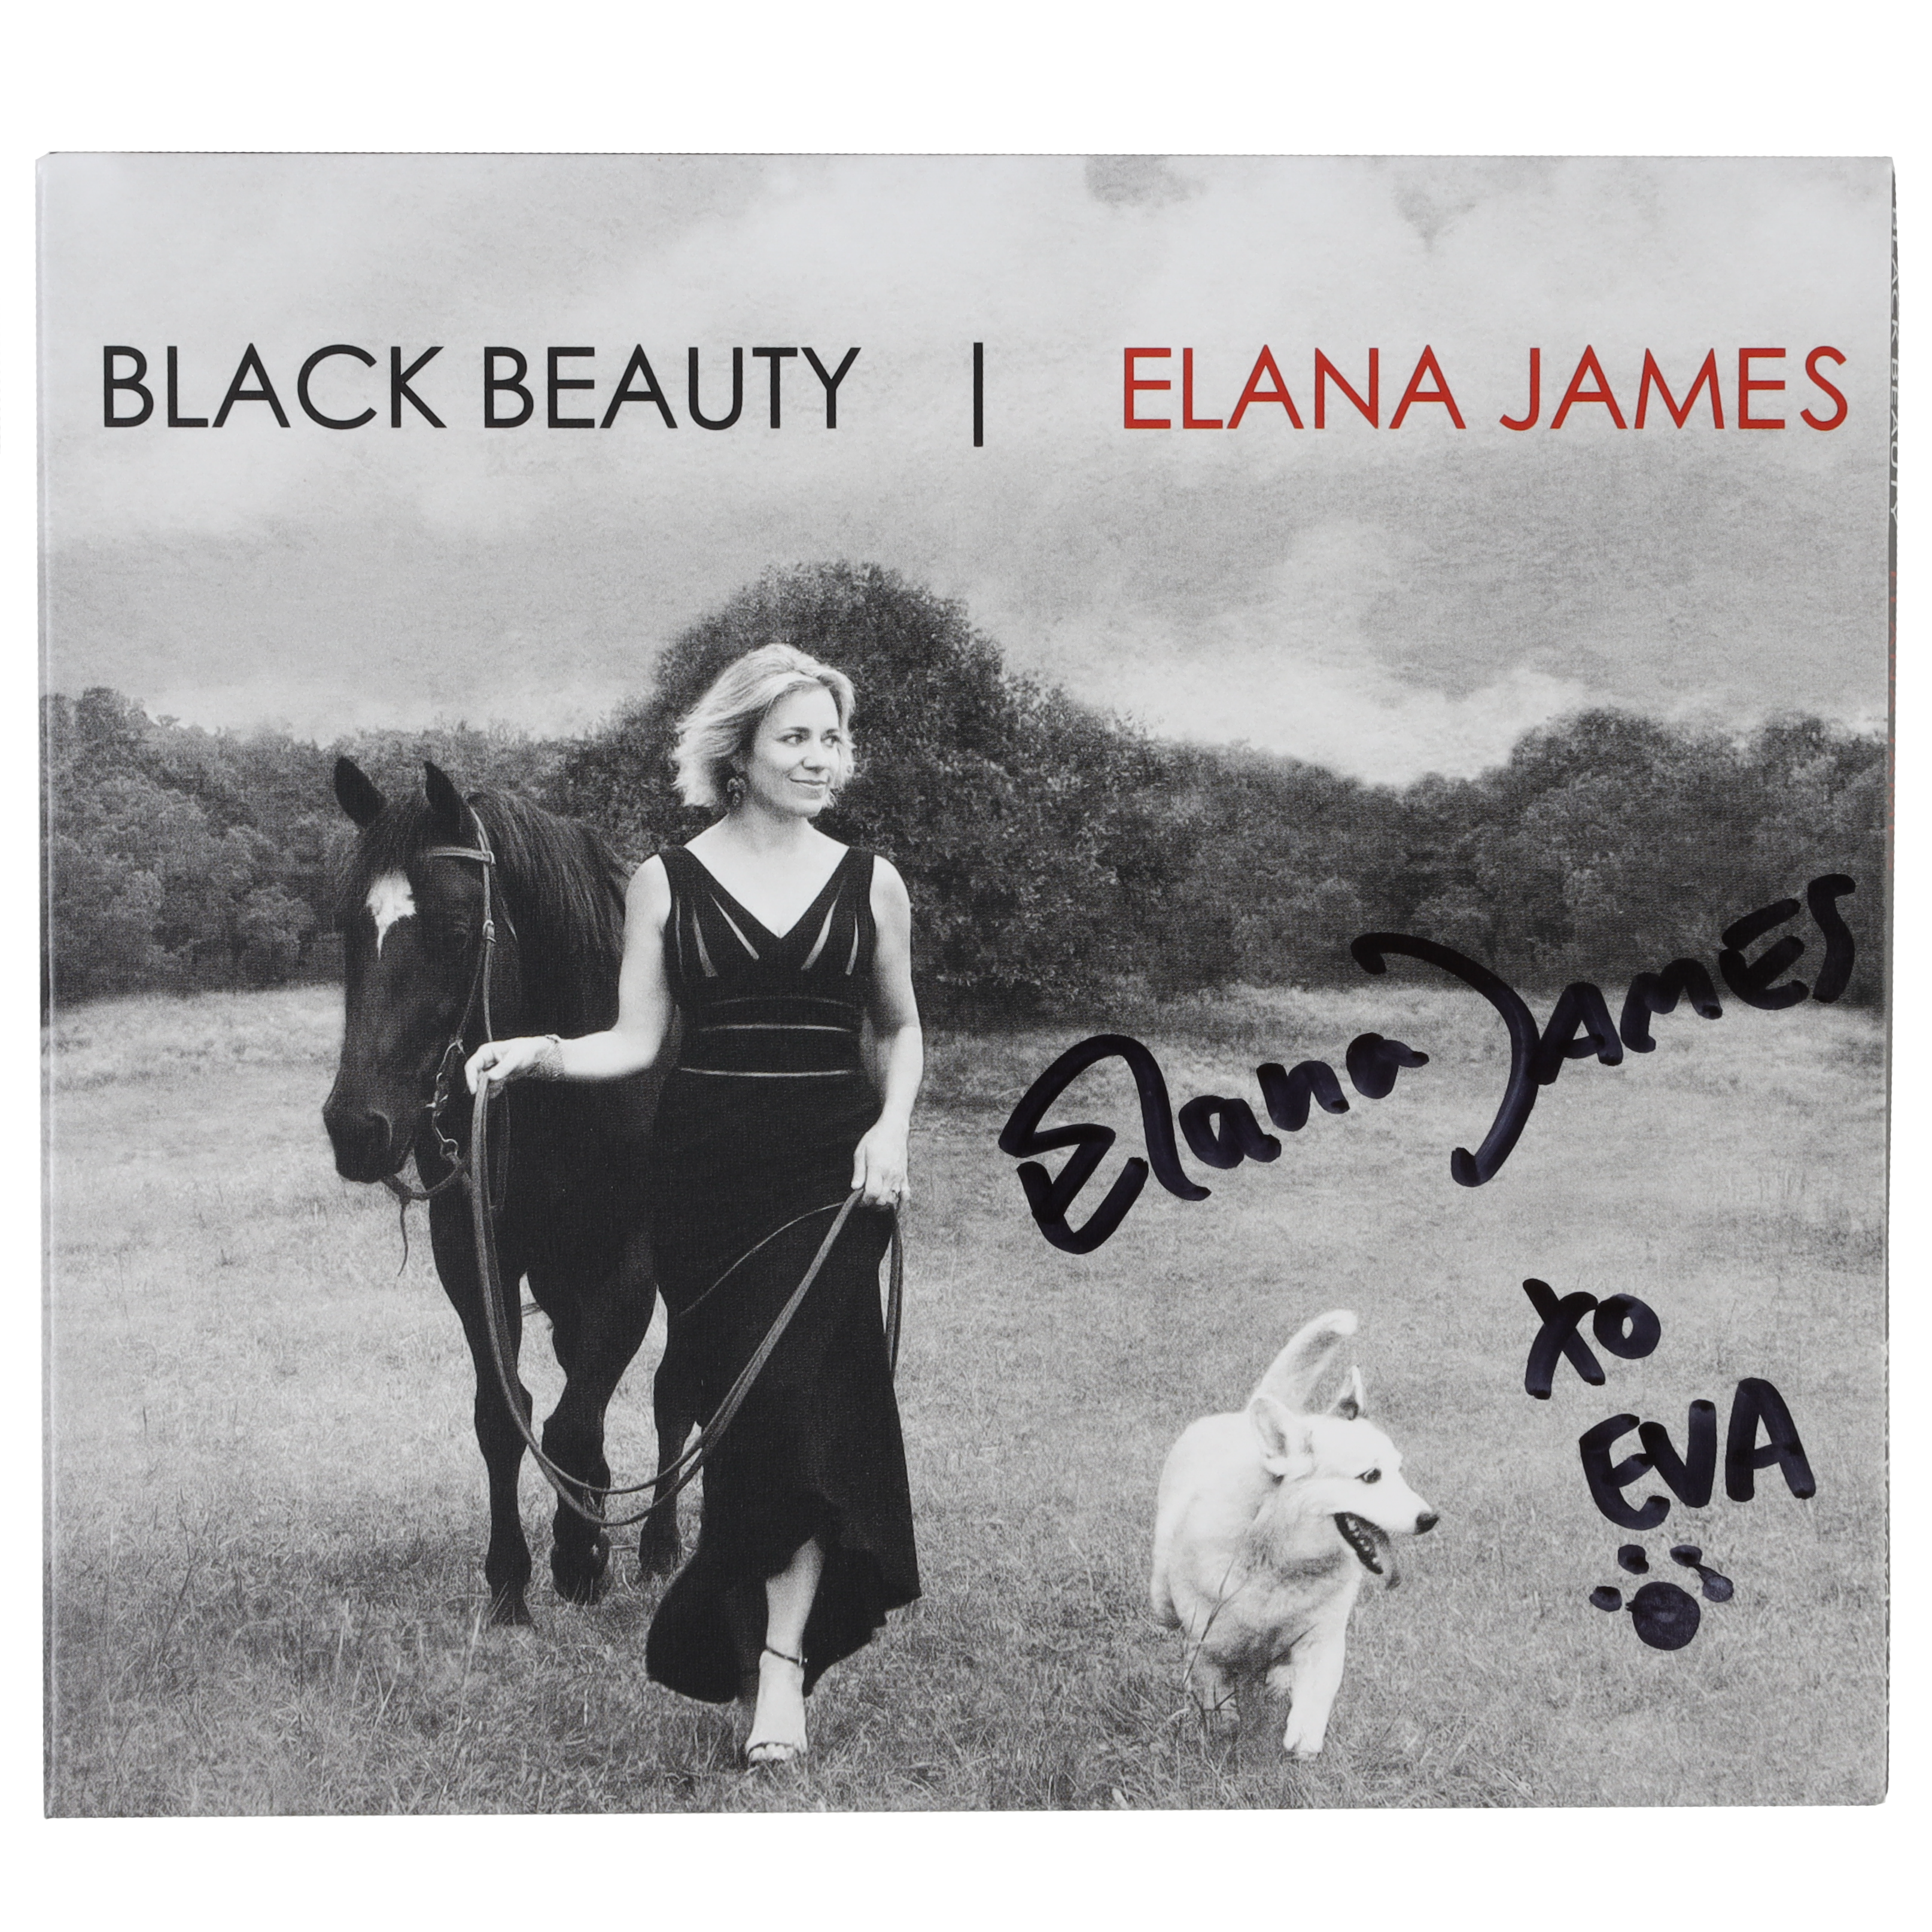 Hot Club of Cowtown | Black Beauty CD (by Elana James, 2015) *Autographed*